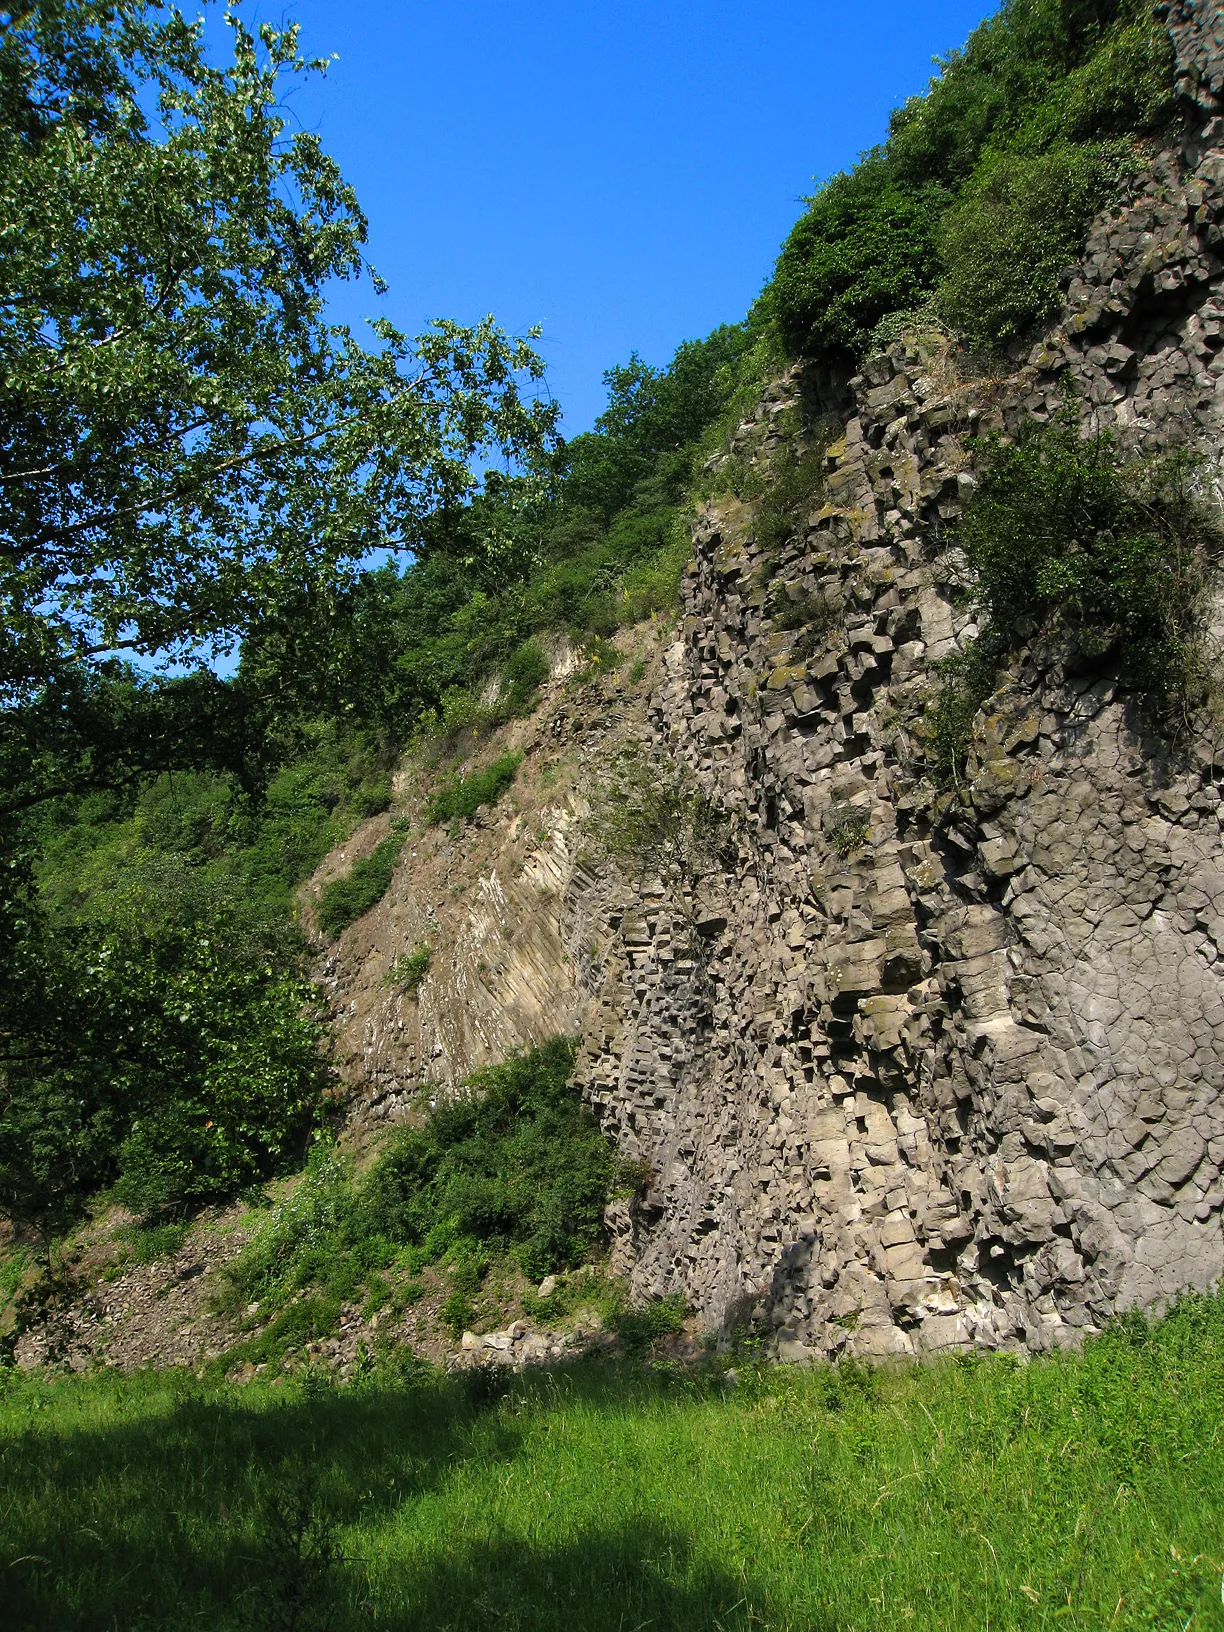 Photo showing: Columnar basaltic rock (basanite) exposed at Amöneburg hill, which is at the northwestern extremity of the Vogelsberg hills, Hesse, central Germany.